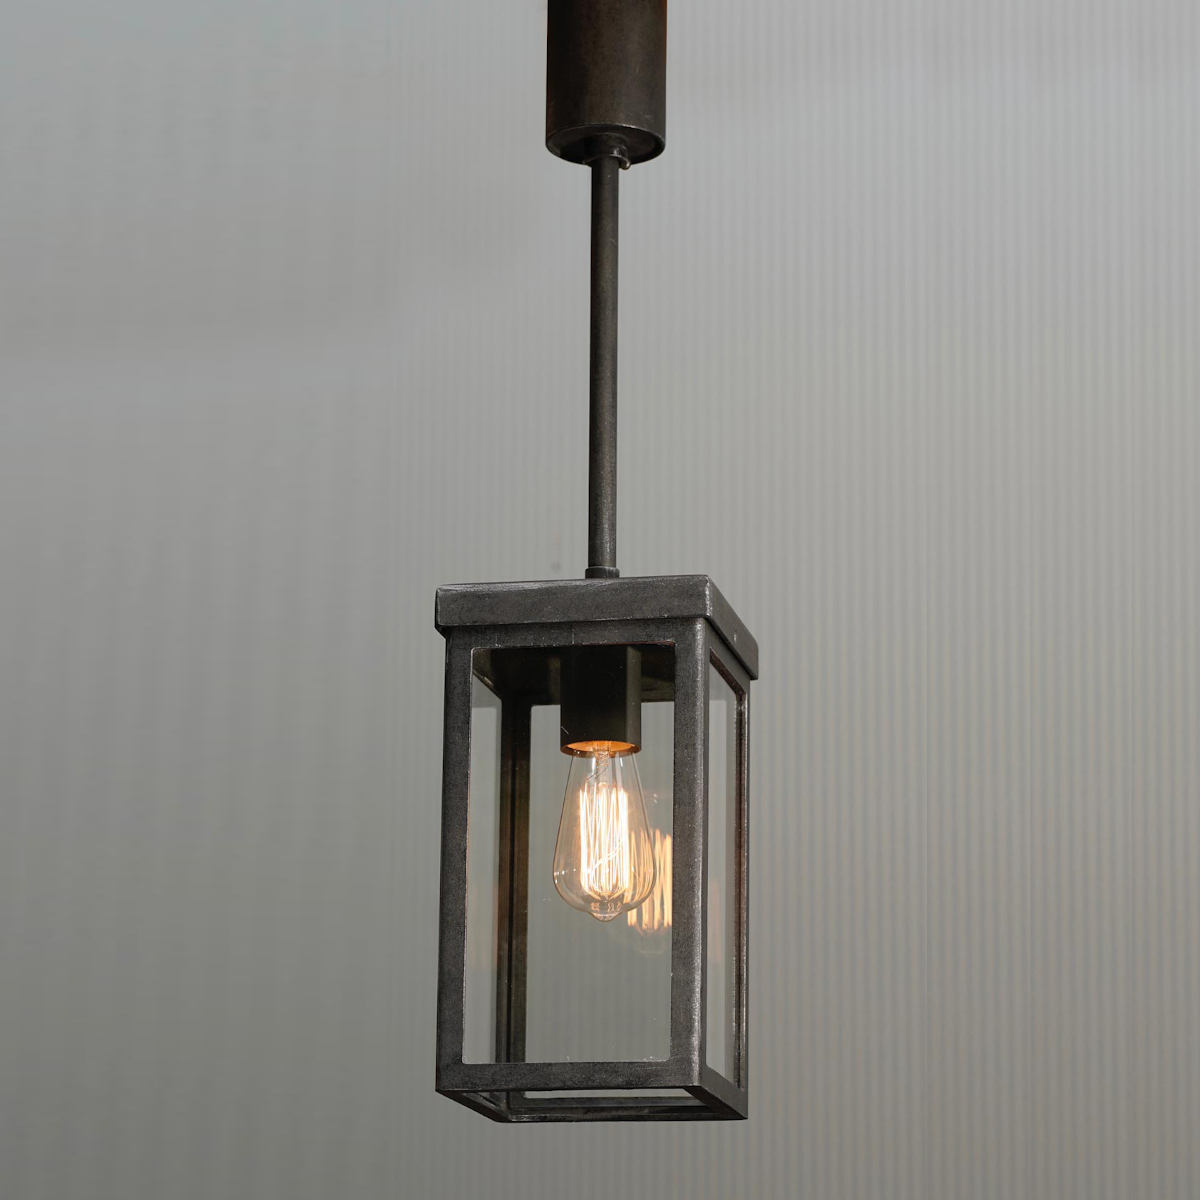 Wrought Iron Cubic Light with Pendant Tube HL 2692